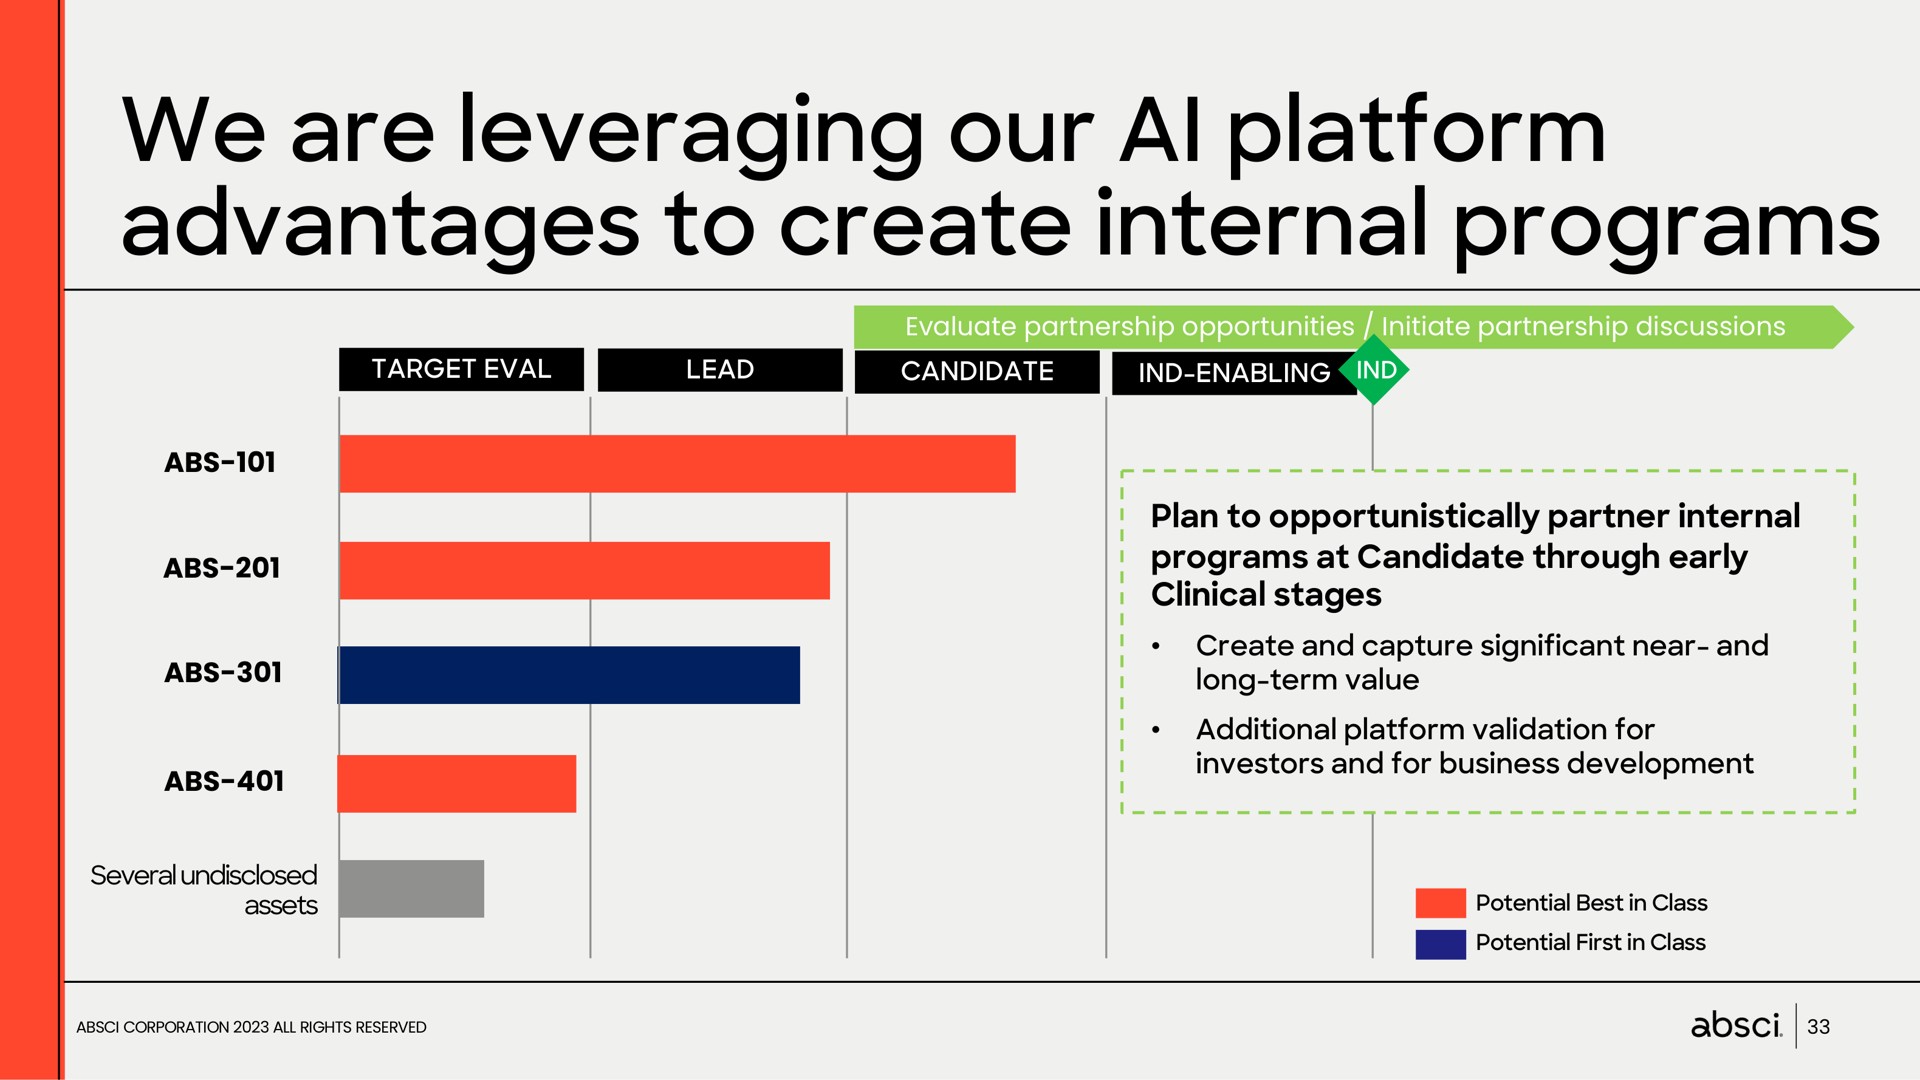 we are leveraging our platform advantages to create internal programs | Absci